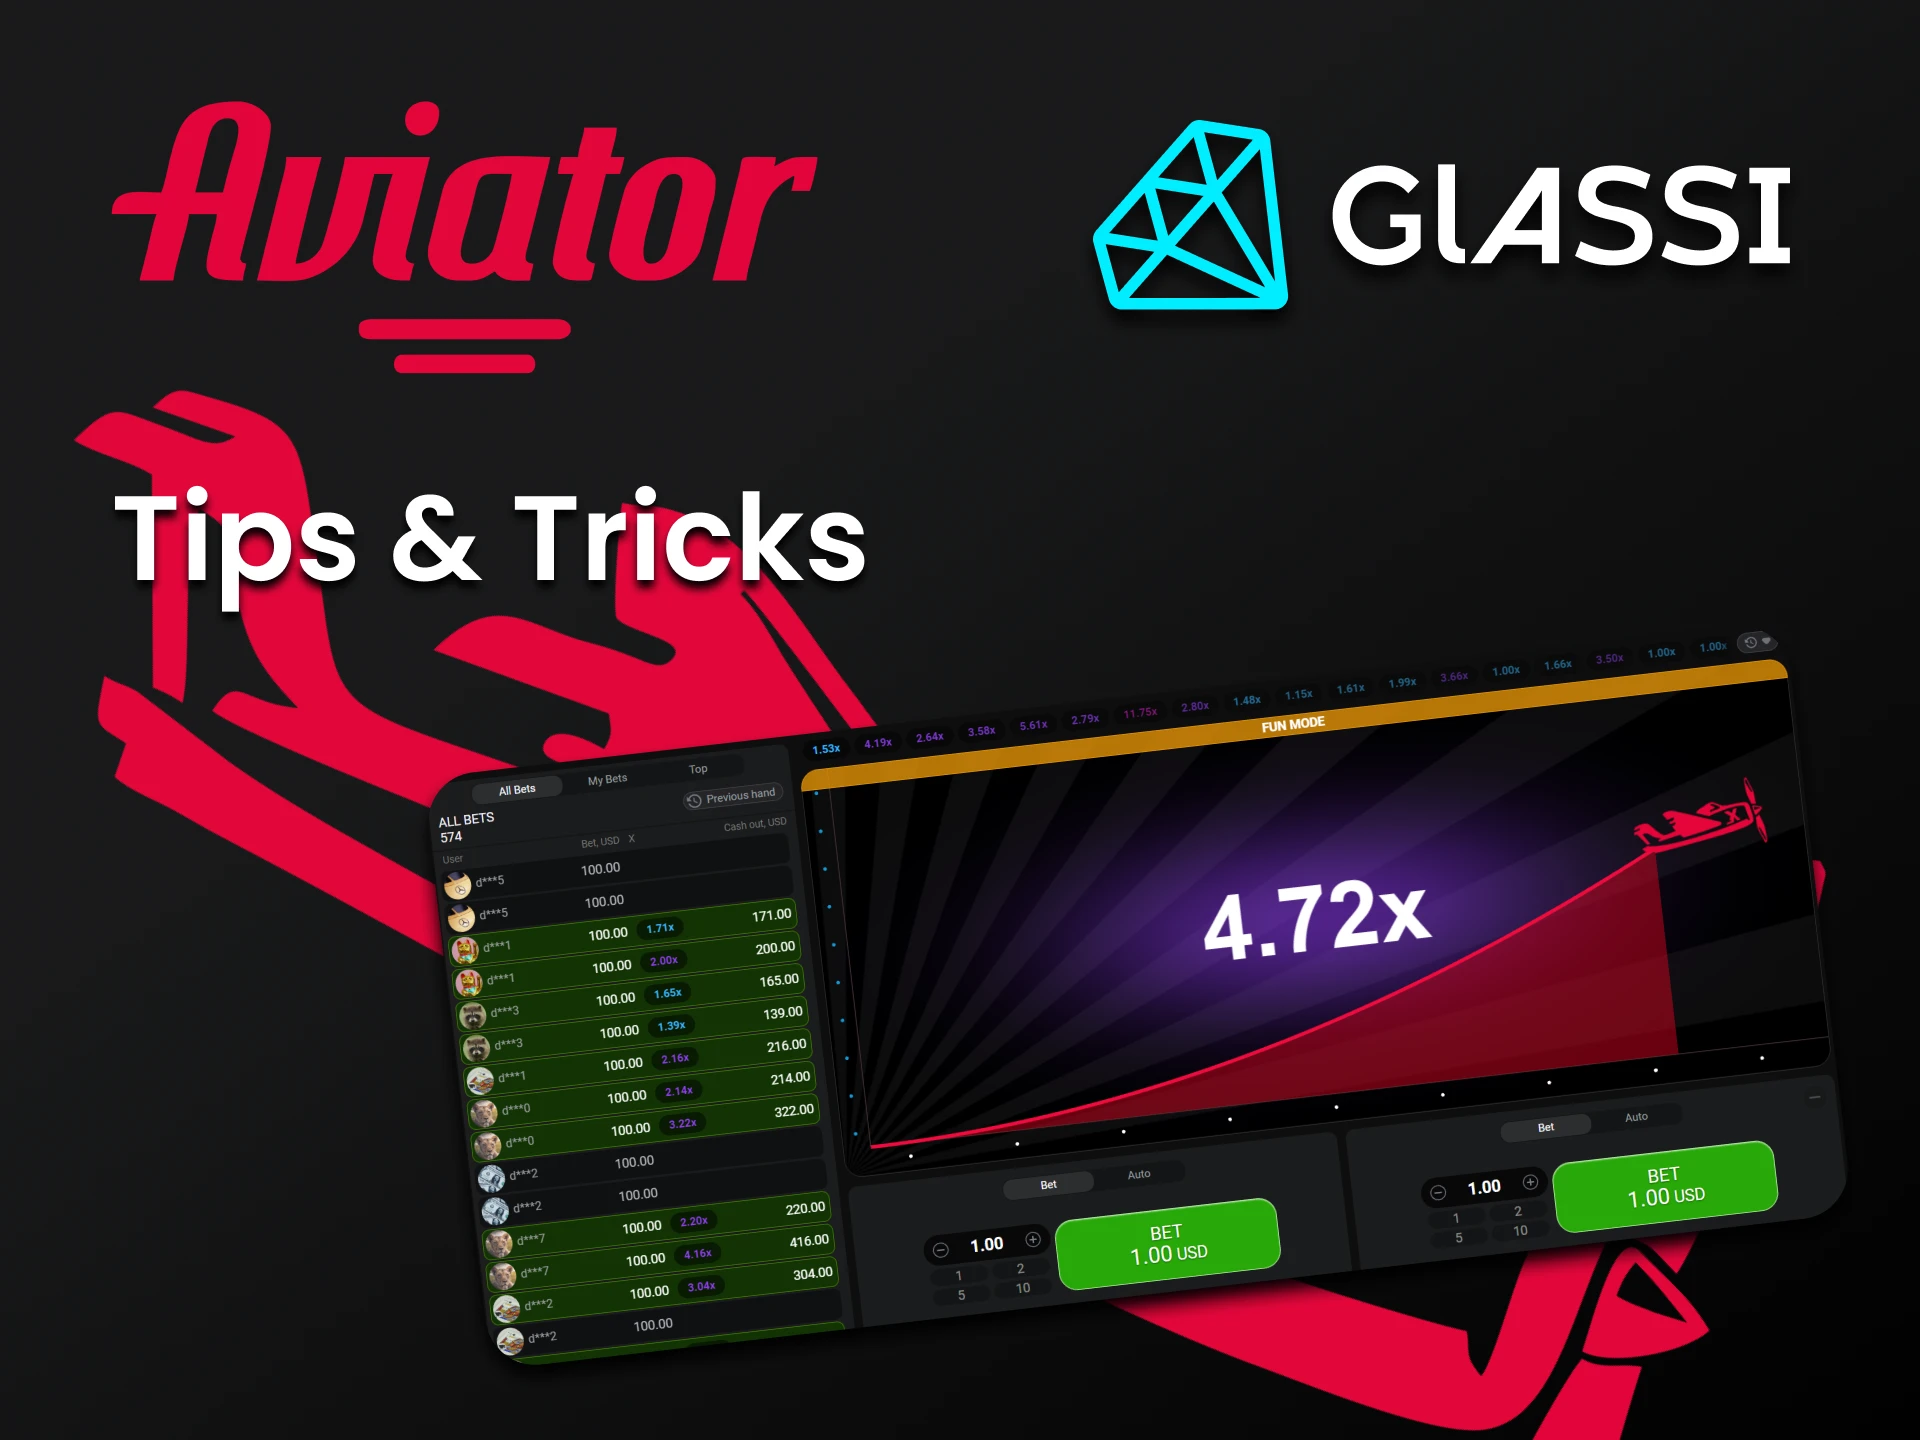 We will tell you about tricks for Aviator at Glassi Casino.